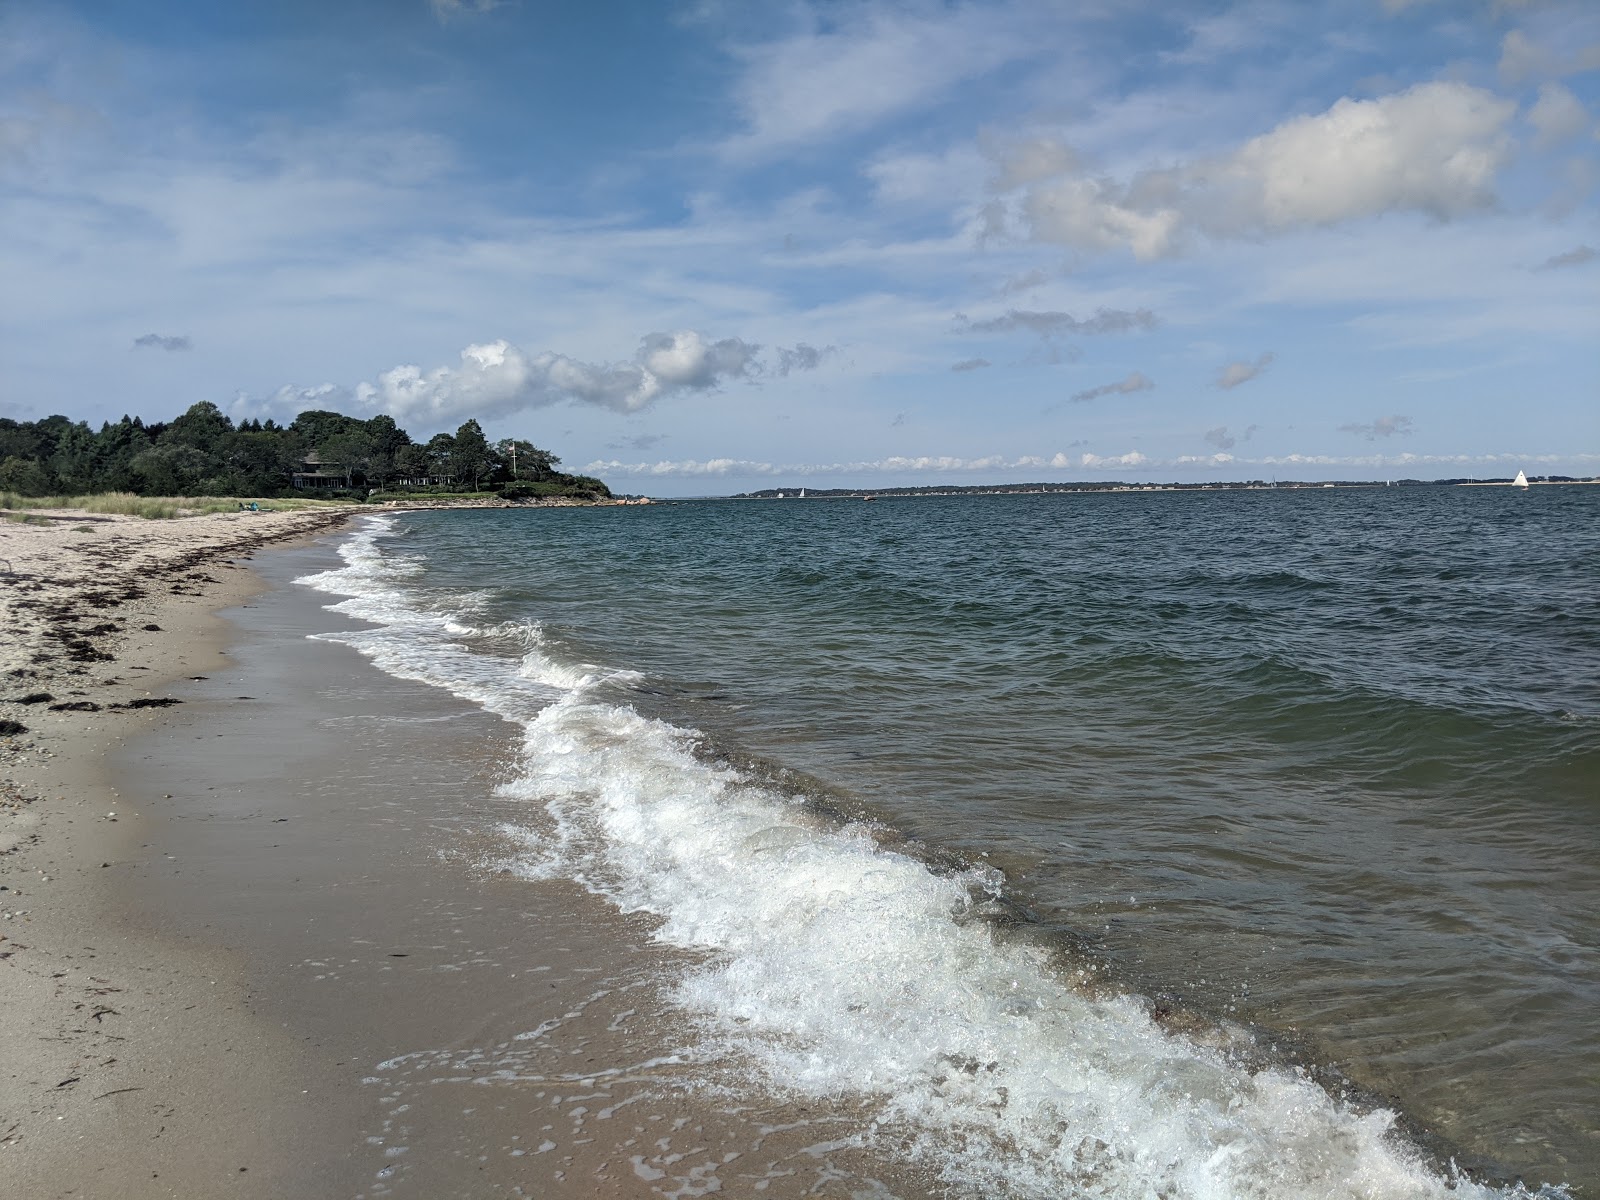 Photo of Menhaden Lane Beach with bright sand surface